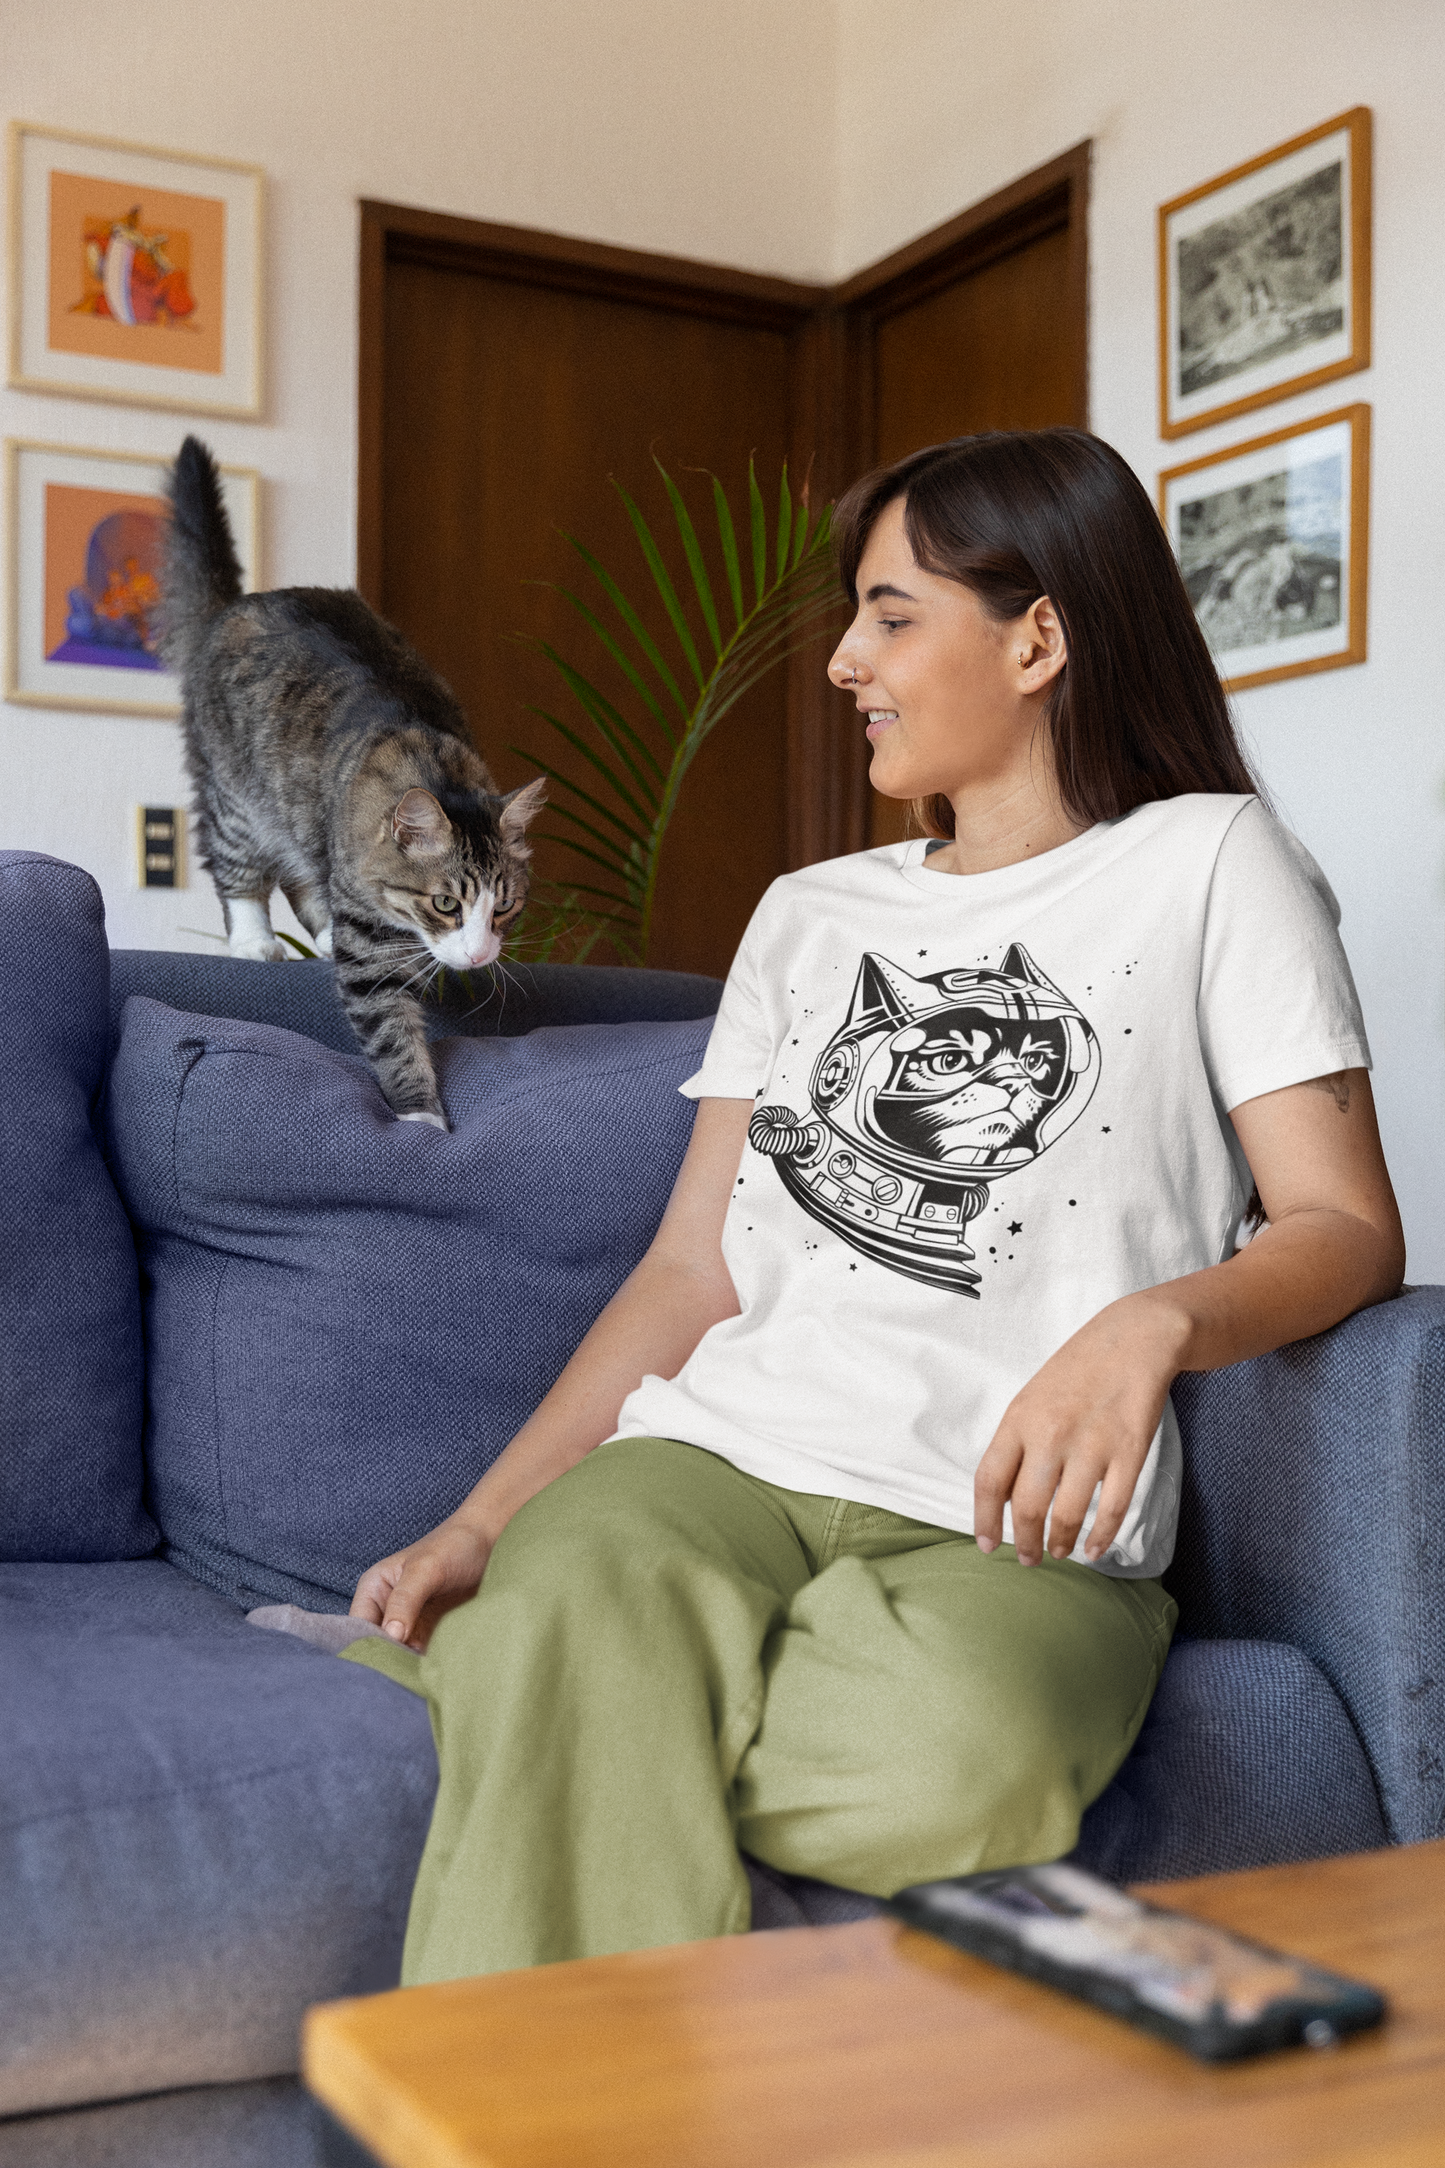 Space Cat Graphic Tee